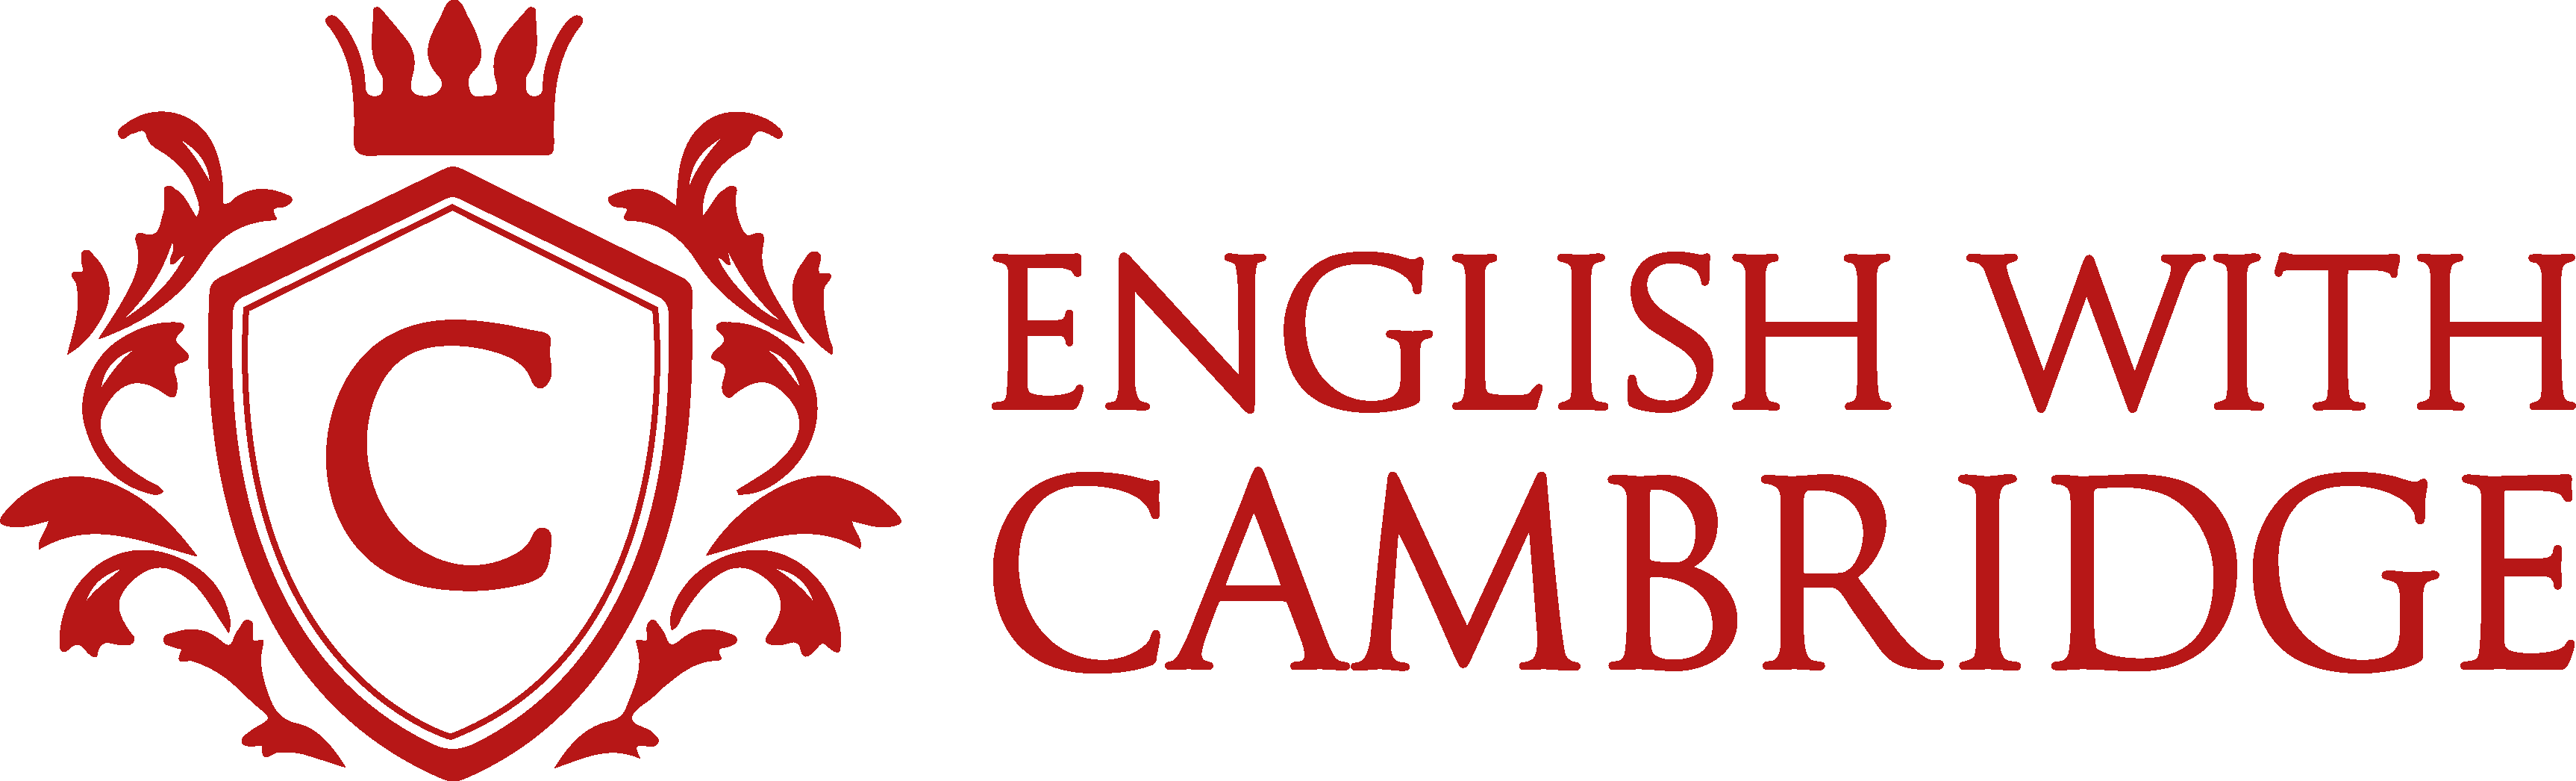 English With Cambridge Coupons & Promo Codes